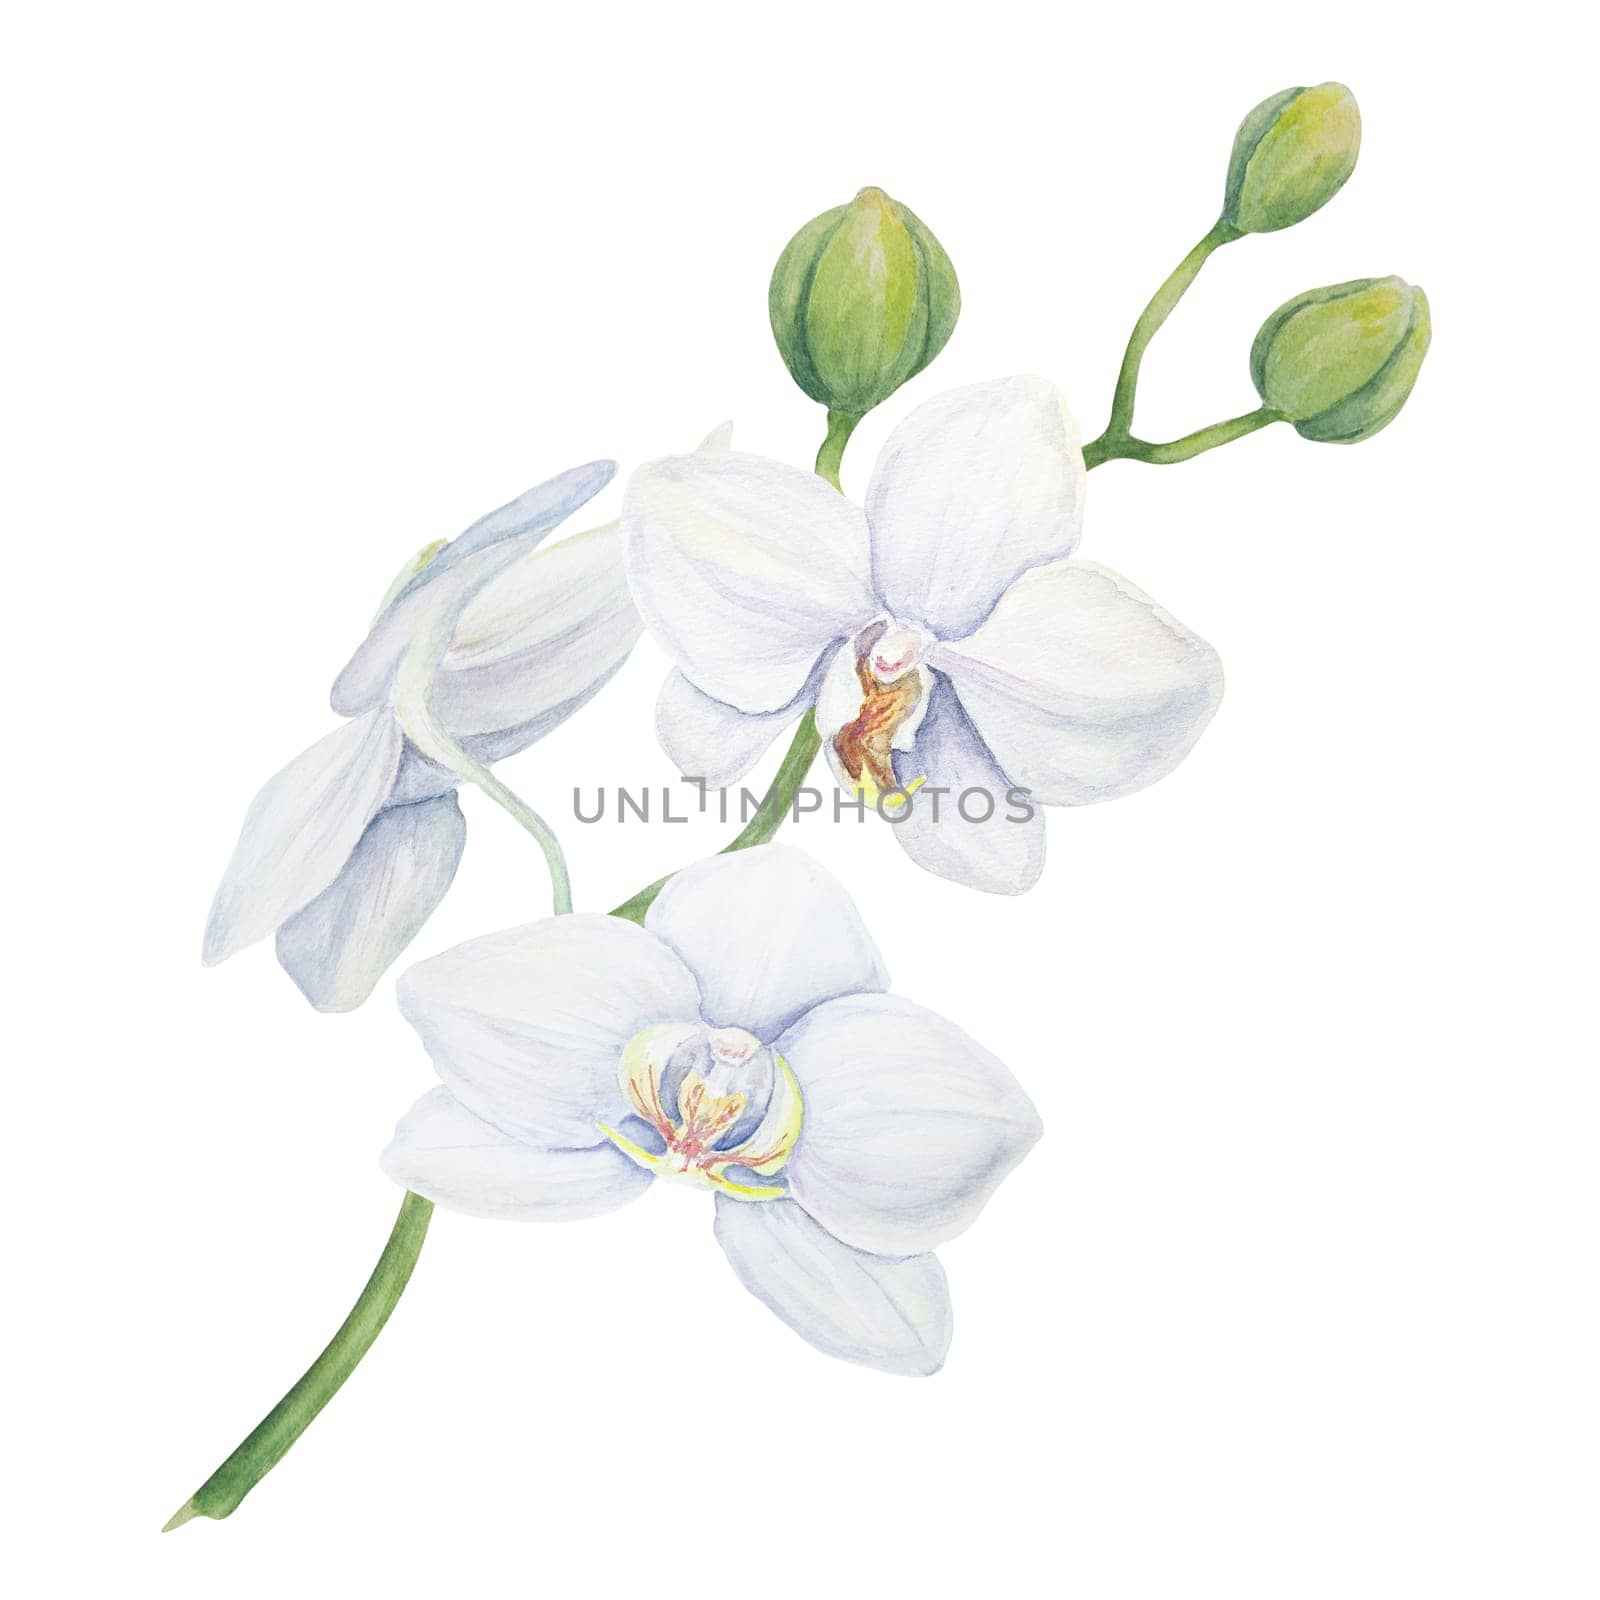 White orchid flower. Delicate realistic botanical watercolor hand drawn illustration. Clipart for wedding invitations, decor, textiles, gifts, packaging and floristry. by florainlove_art